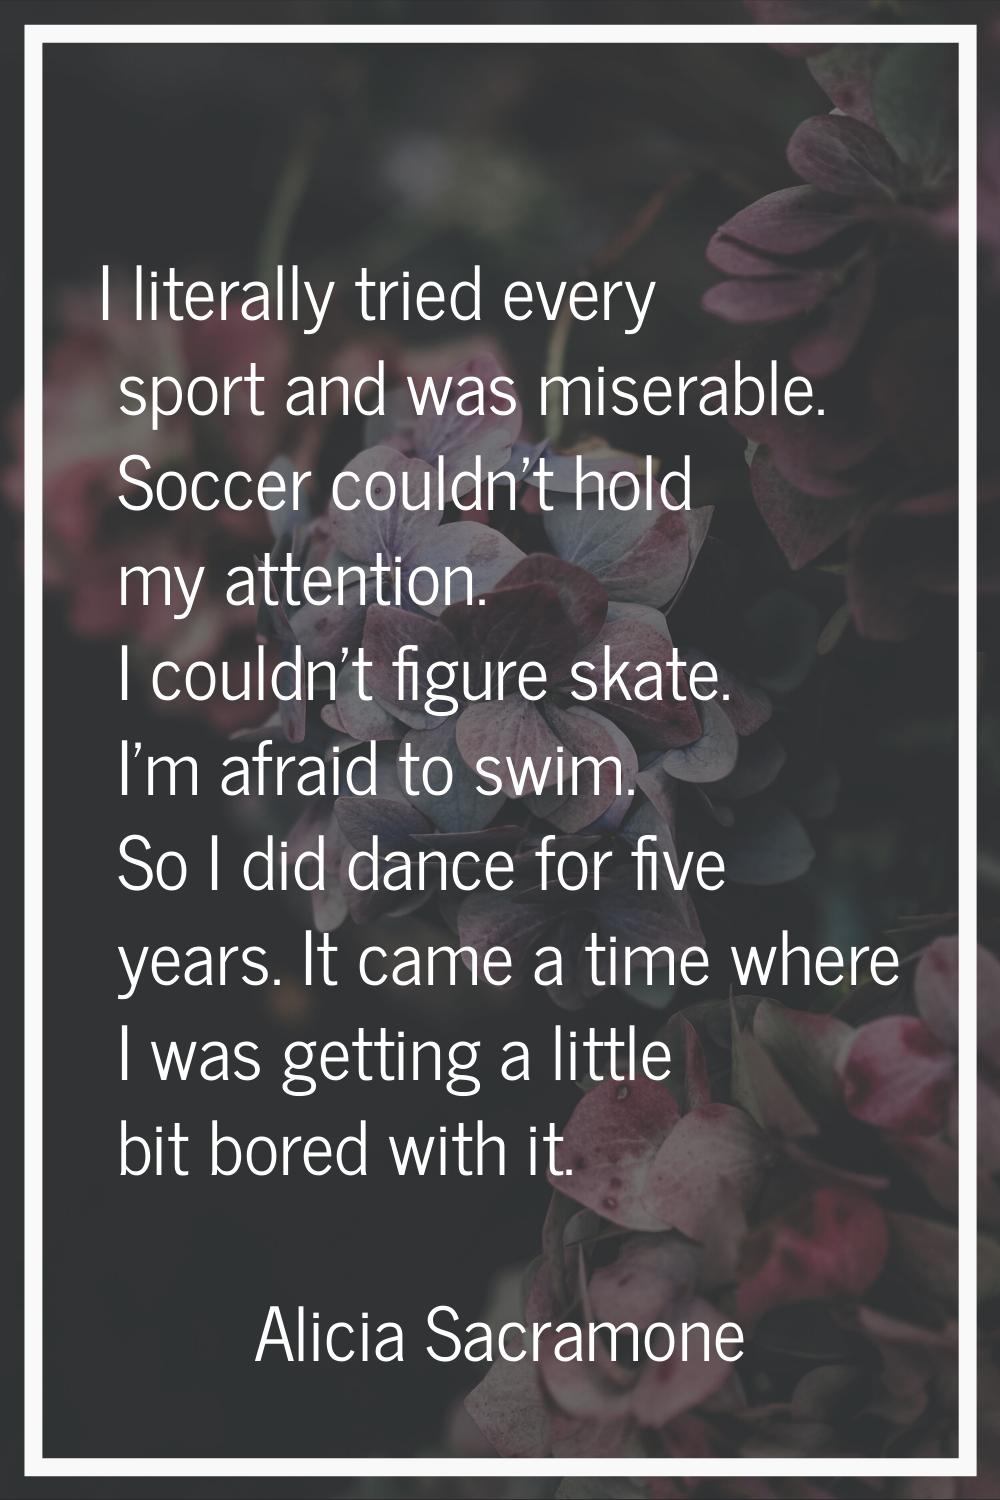 I literally tried every sport and was miserable. Soccer couldn't hold my attention. I couldn't figu